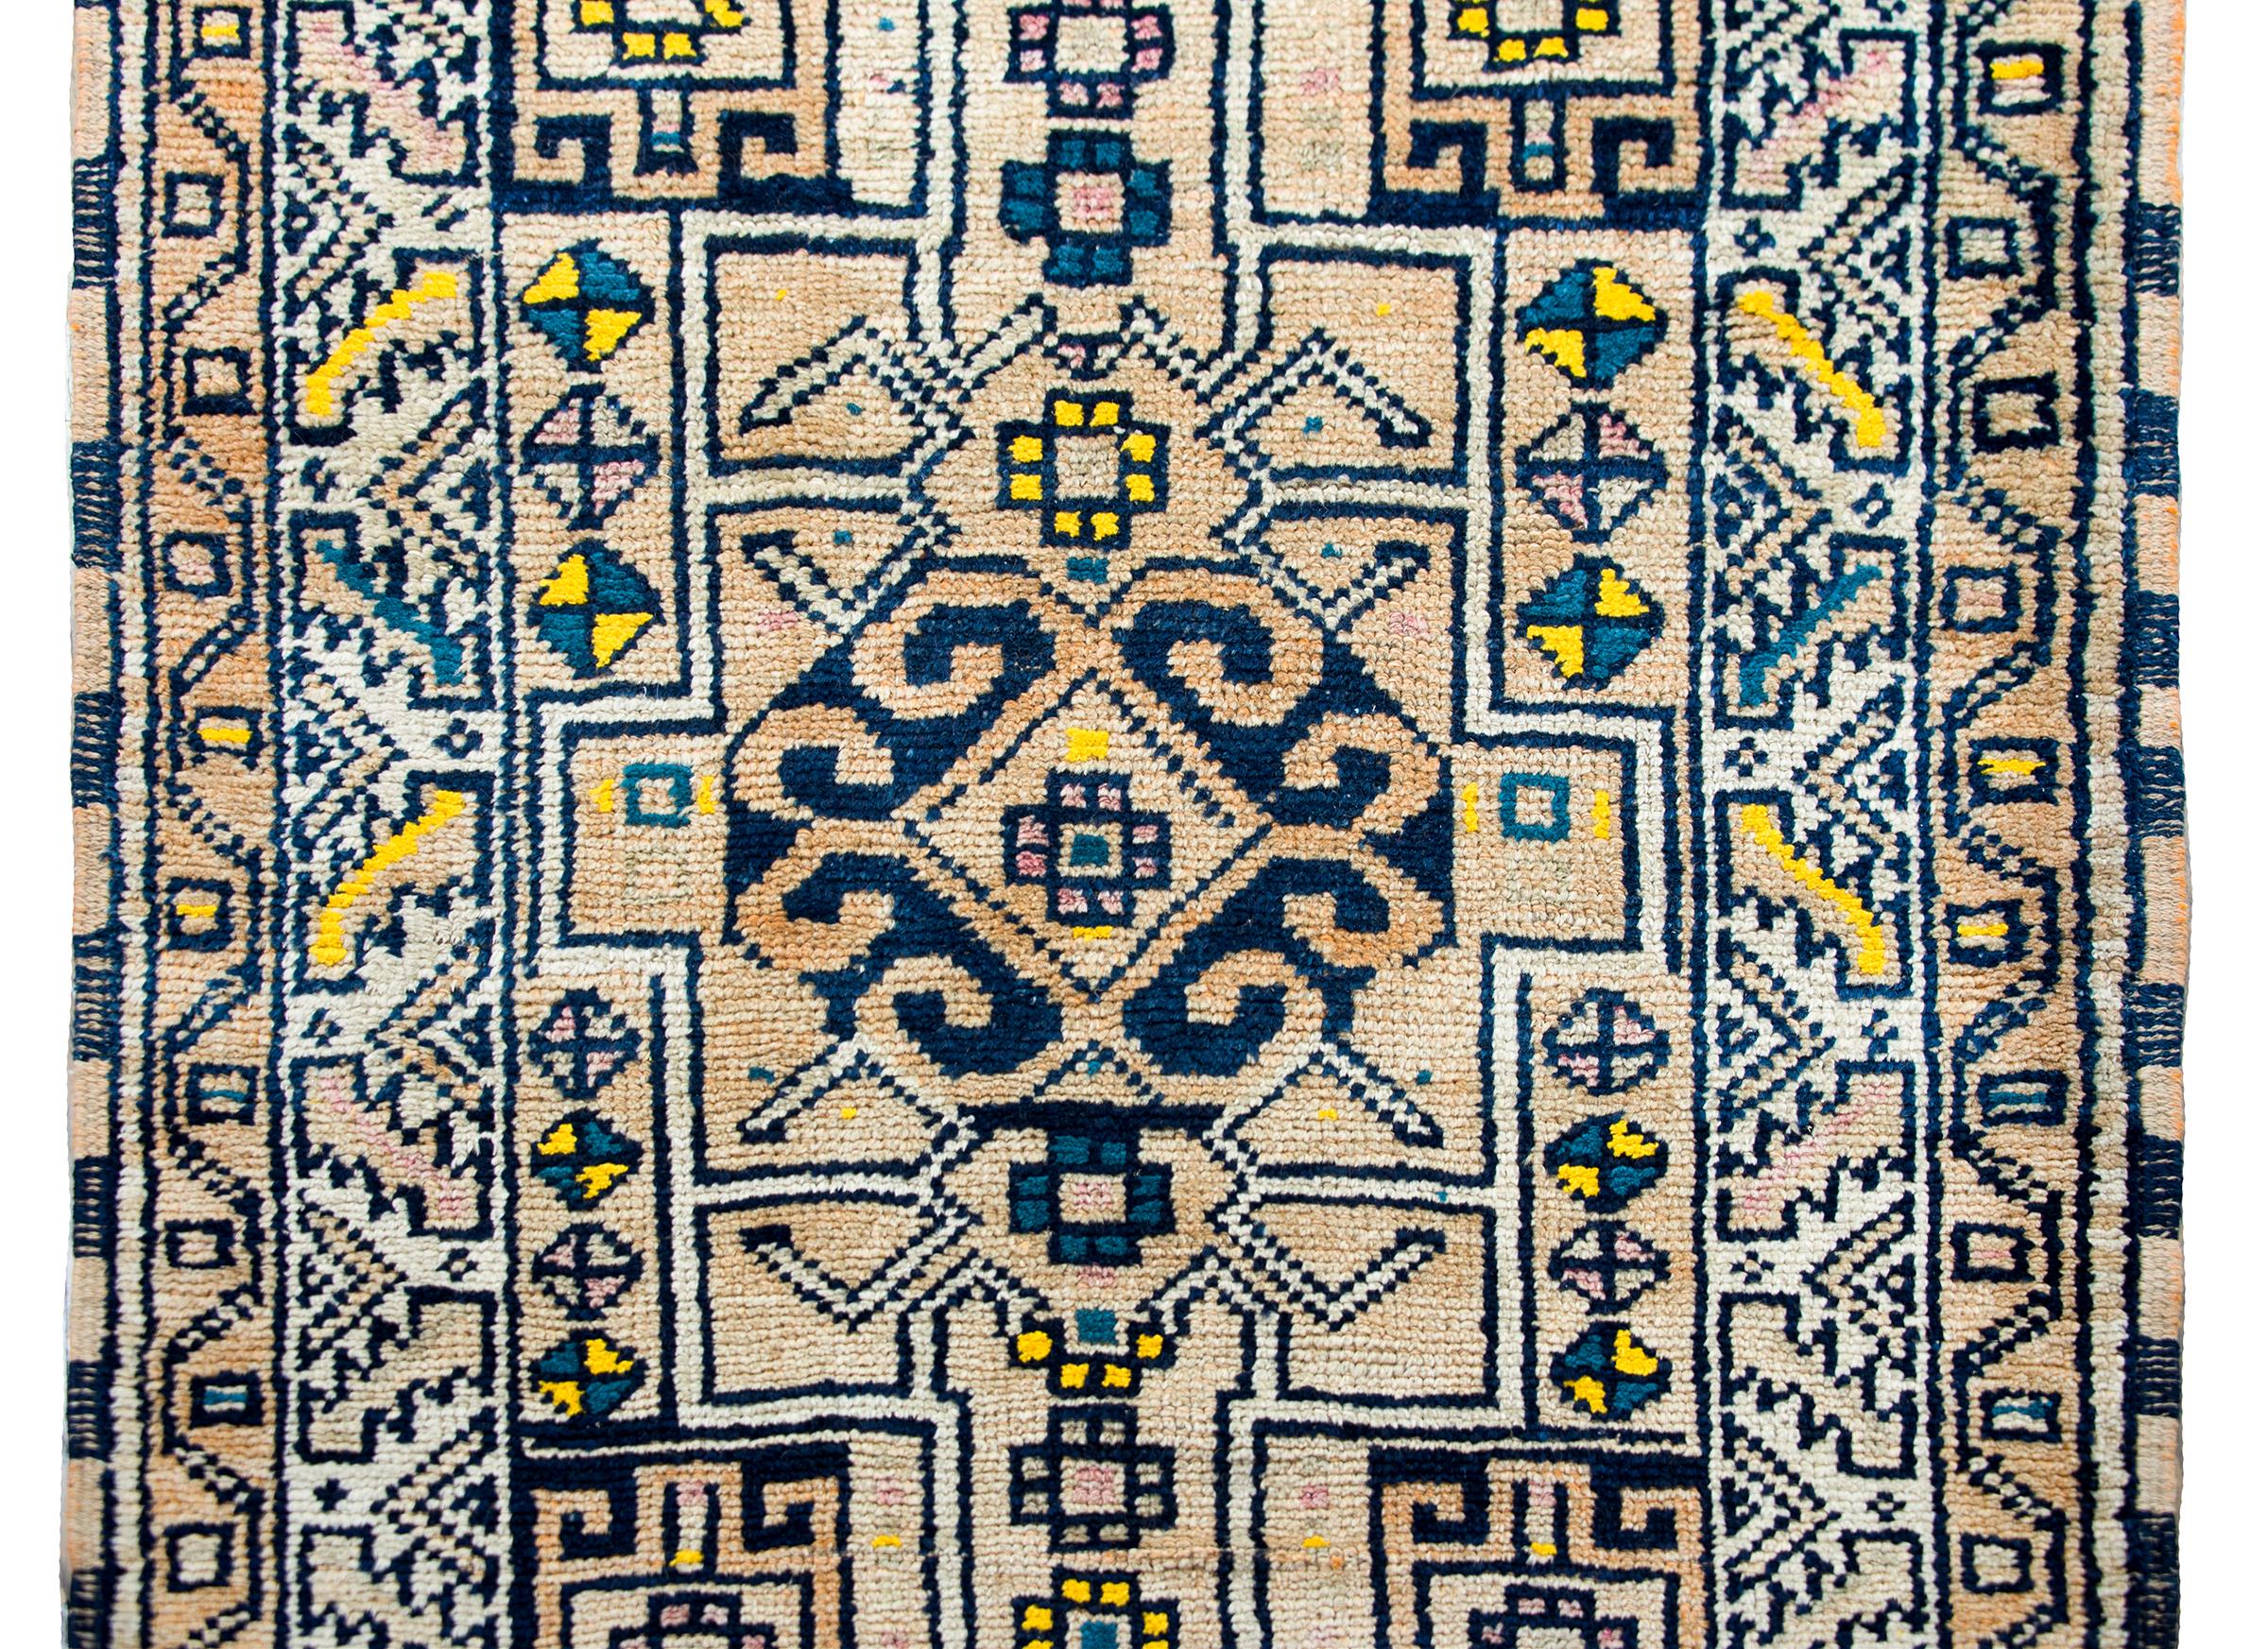 A bold mid-20th century Anatolian Turkish Runner with a repeated geometric lattice pattern with stylized floral medallions, and surrounded by a border of more geometric patterns, and all woven in light and dark indigo, gold, cream, and white wool.